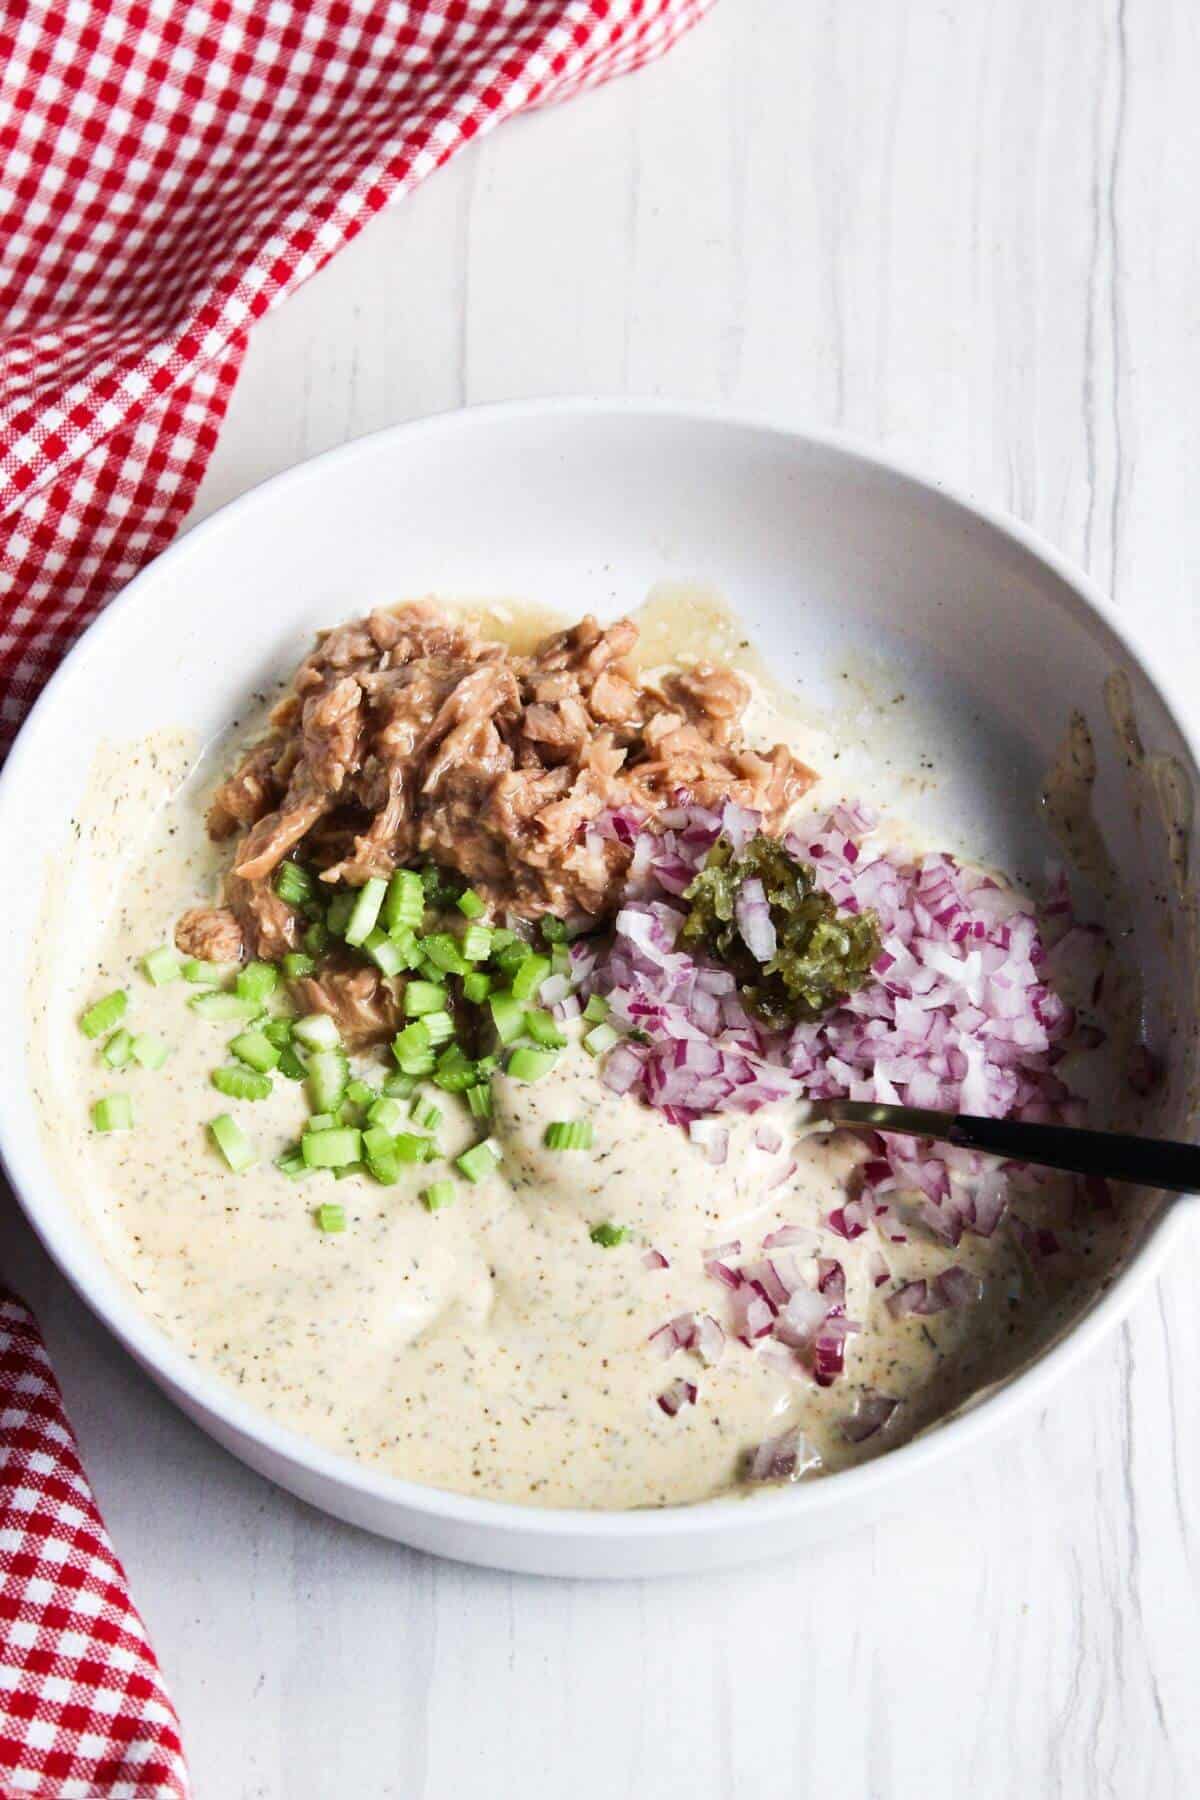 Tuna, onions and relish added to mayonnaise mixture in bowl.